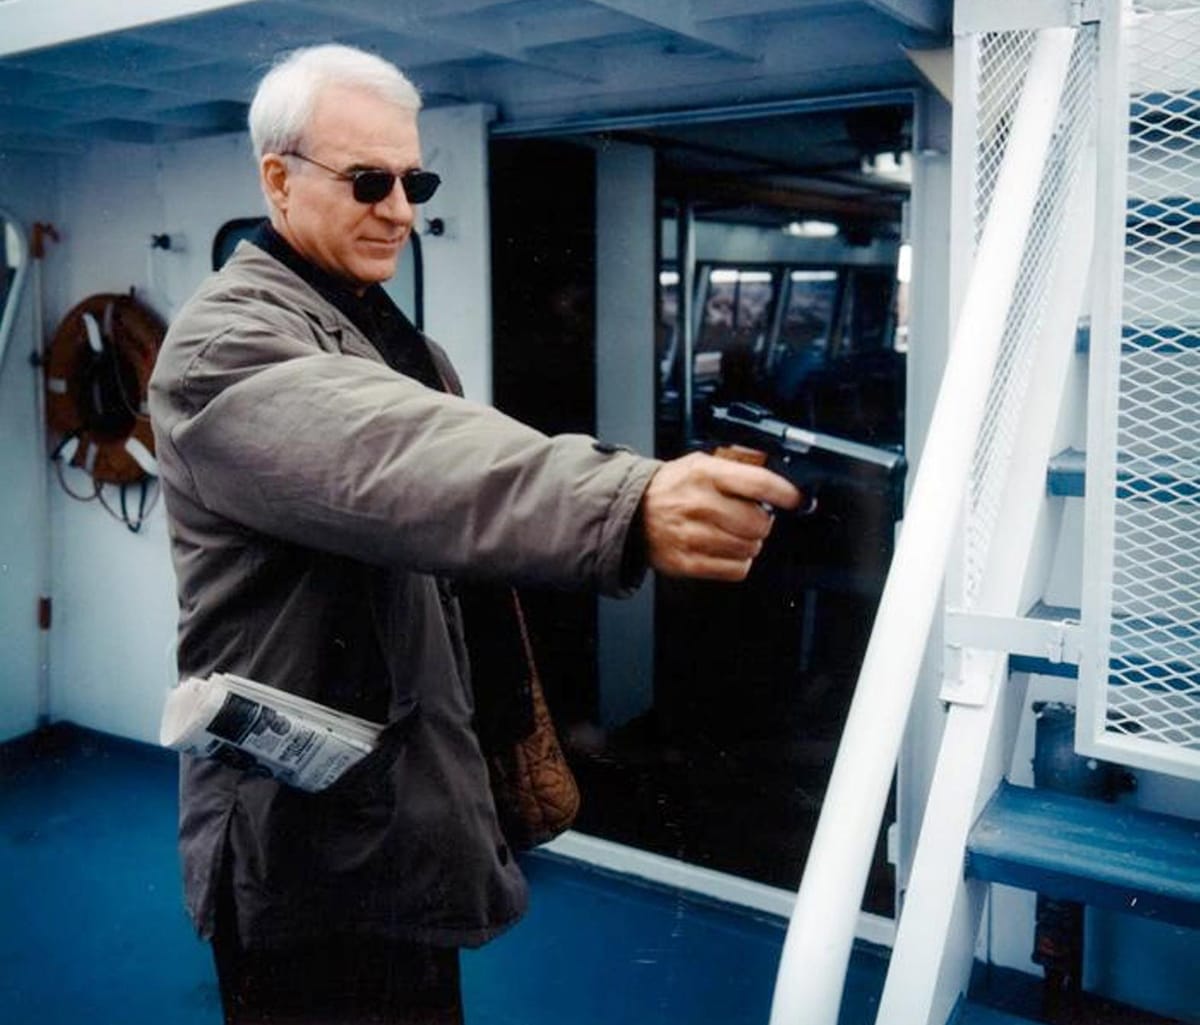 Steve Martin was cast in a villainous role in The Spanish Prisoner, making it one of the more serious movies in his filmography